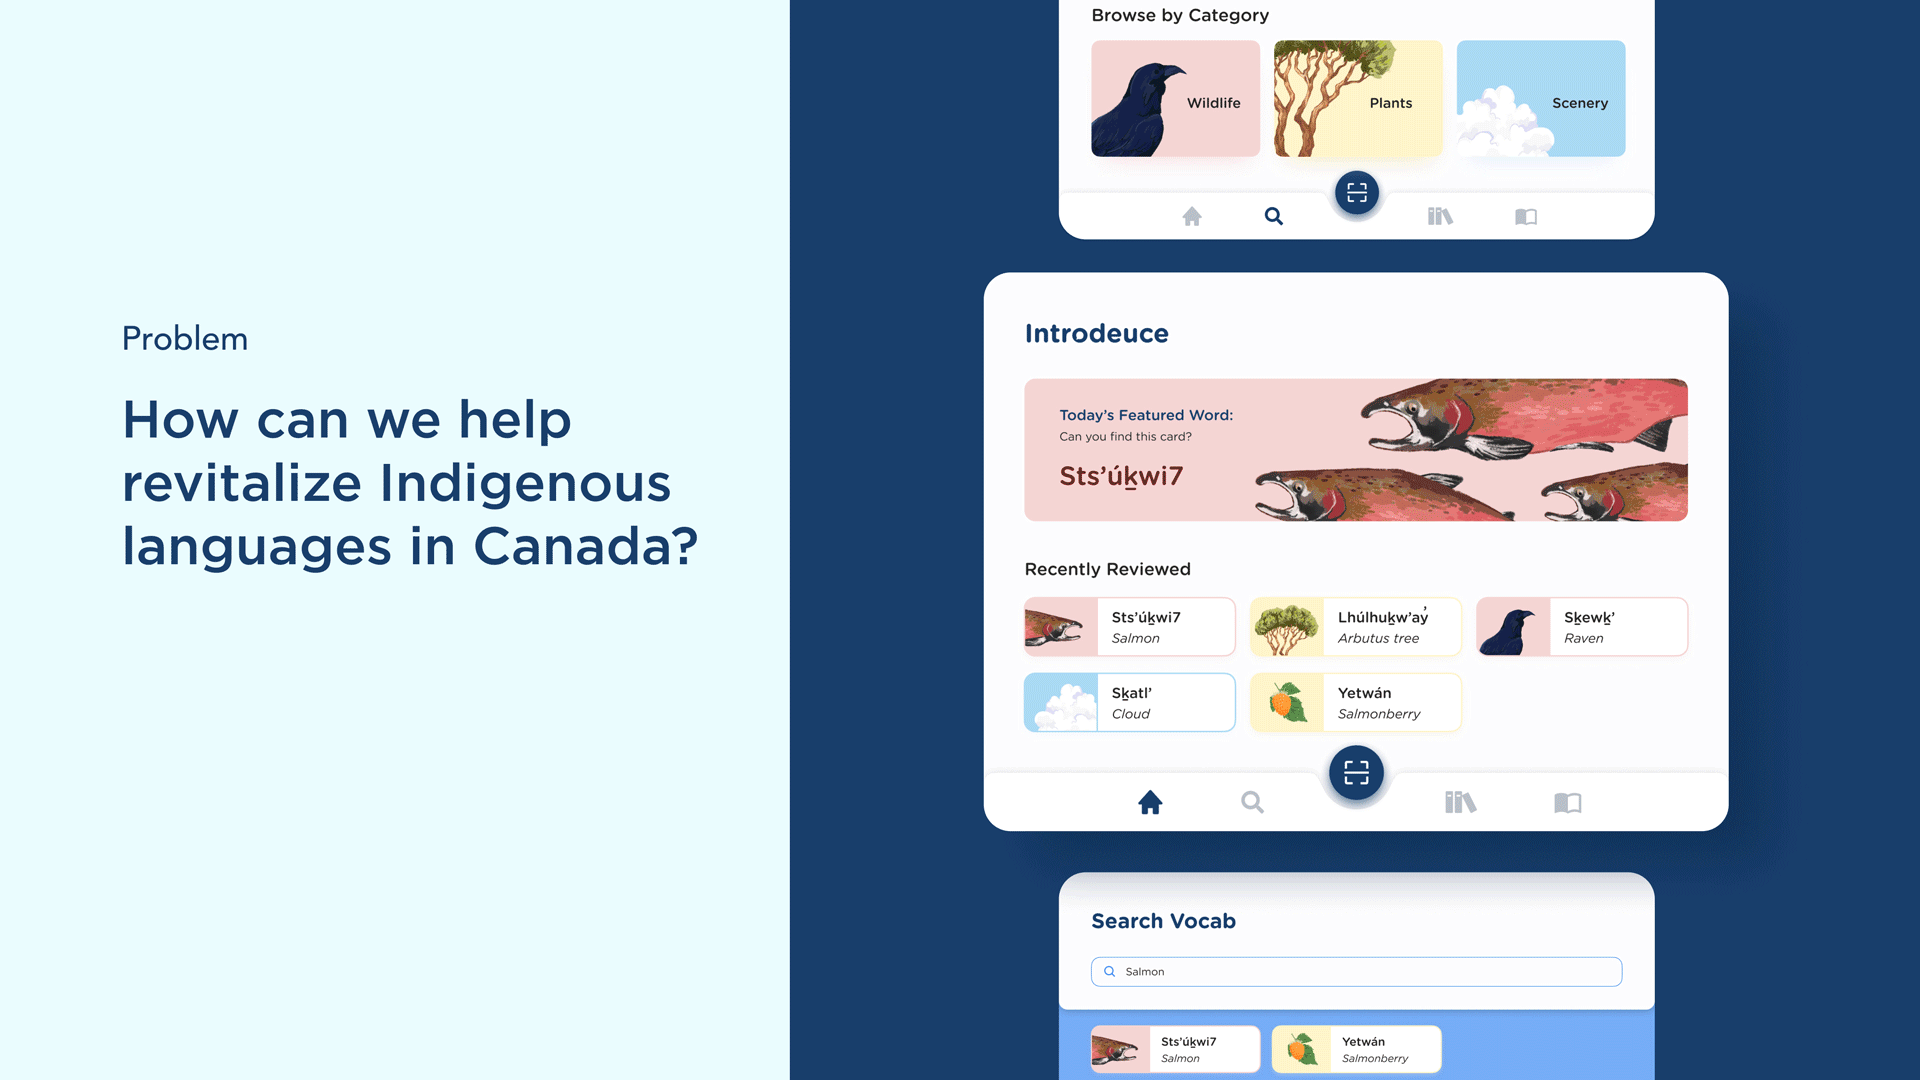 A gif showcase of Introdeuce, a classroom app to teach children Squamish vocabulary with title text that says “Problem: How can we help revitalize Indigenous languages in Canada?”